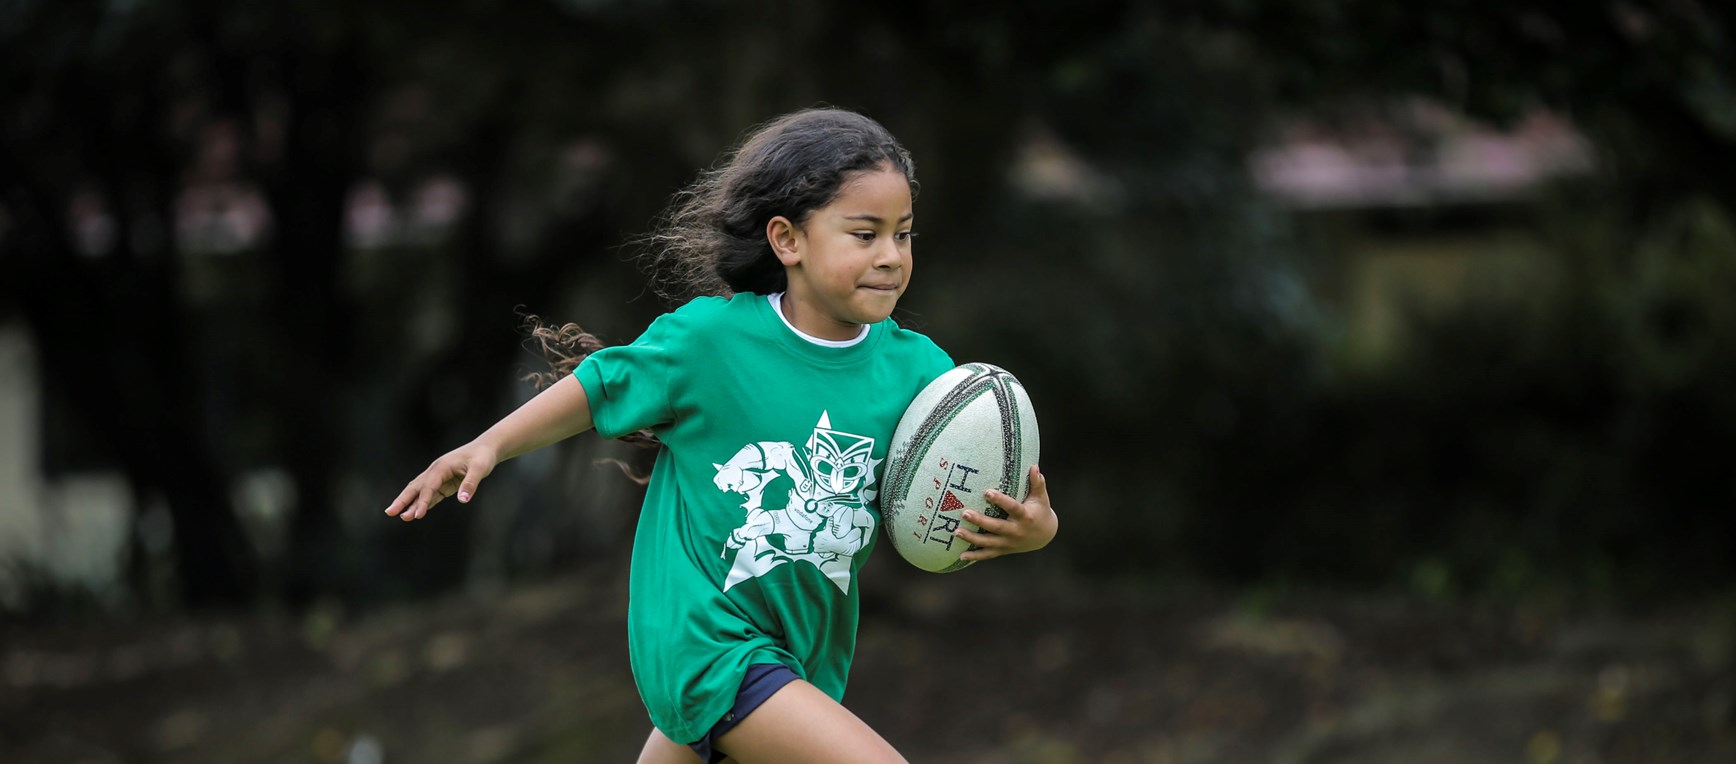 Future Warriors Footy Clinic in pictures